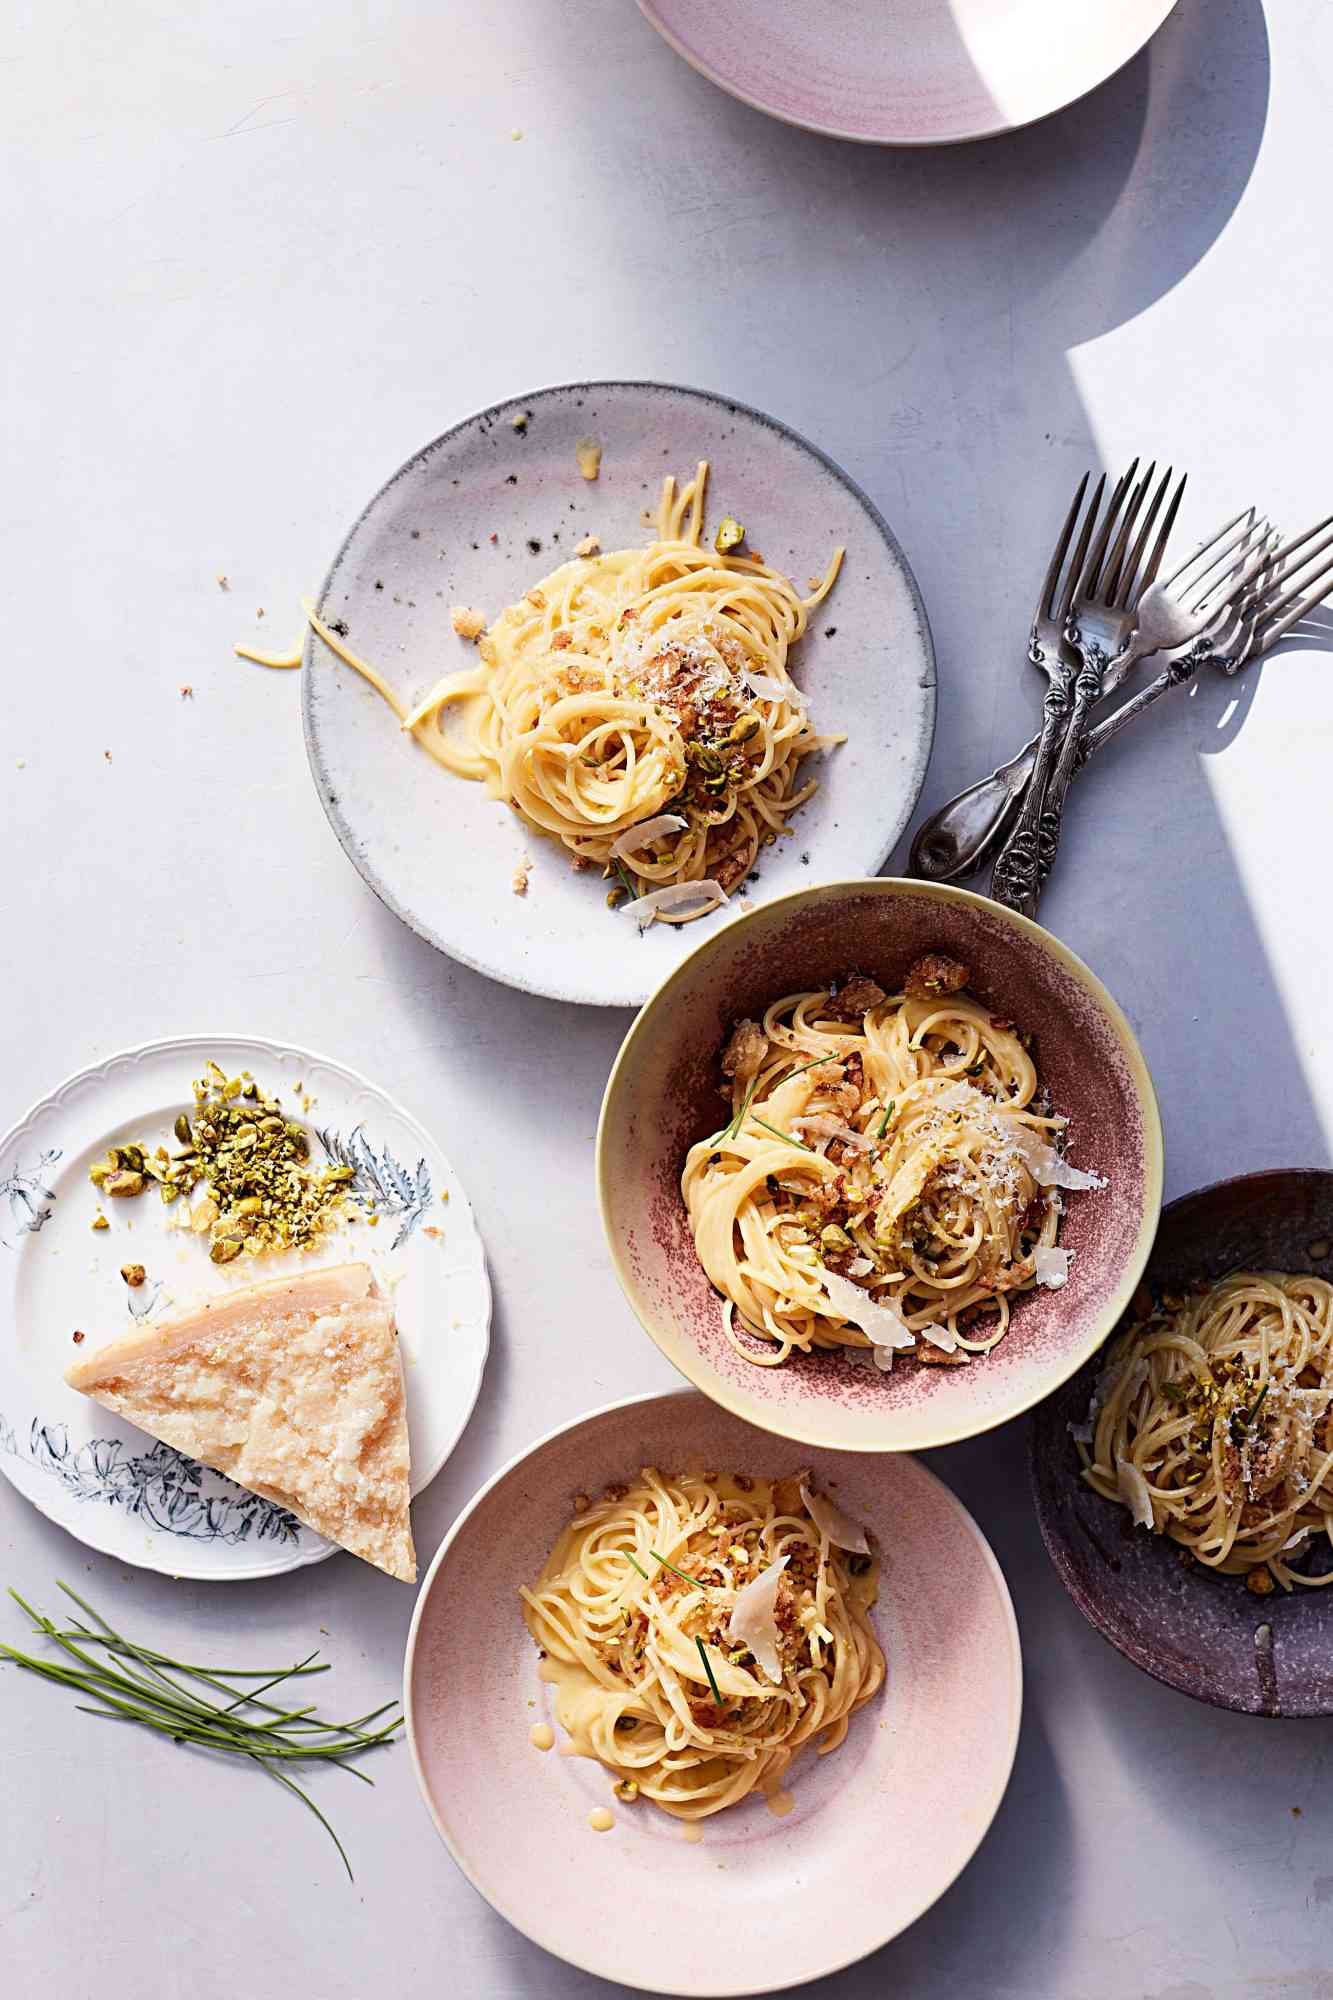 Quick, Easy, and Delicious Pasta Recipes Ideal for Weeknight Dinners